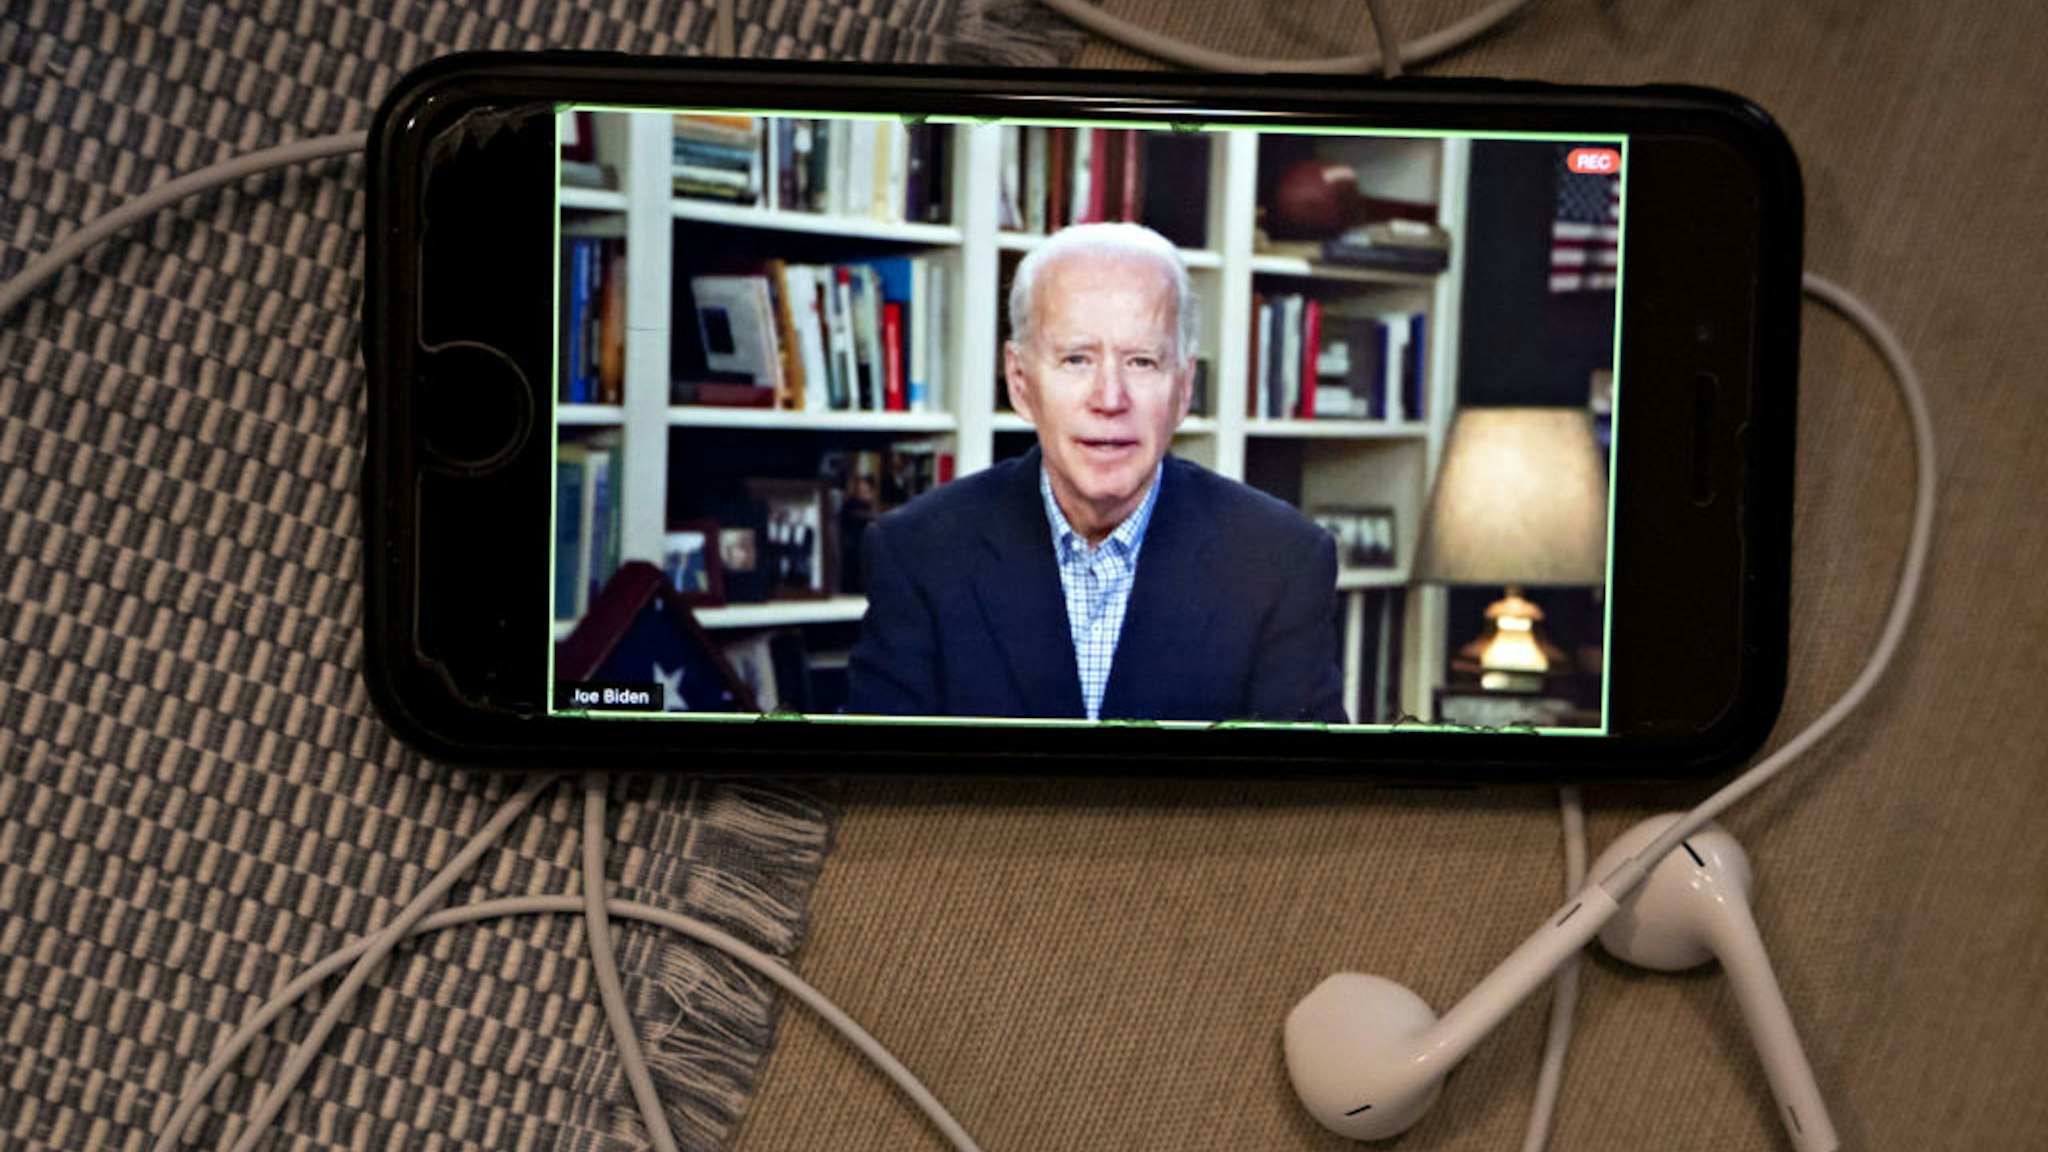 Former Vice President Joe Biden, 2020 Democratic presidential candidate, speaks during a virtual press briefing on a smartphone in this arranged photograph in Arlington, Virginia, U.S., on Wednesday, March 25, 2020. During the livestreamed news conference today, Biden said he didn't see the need for another debate, which the Democratic National Committee had previously said would happen sometime in April.